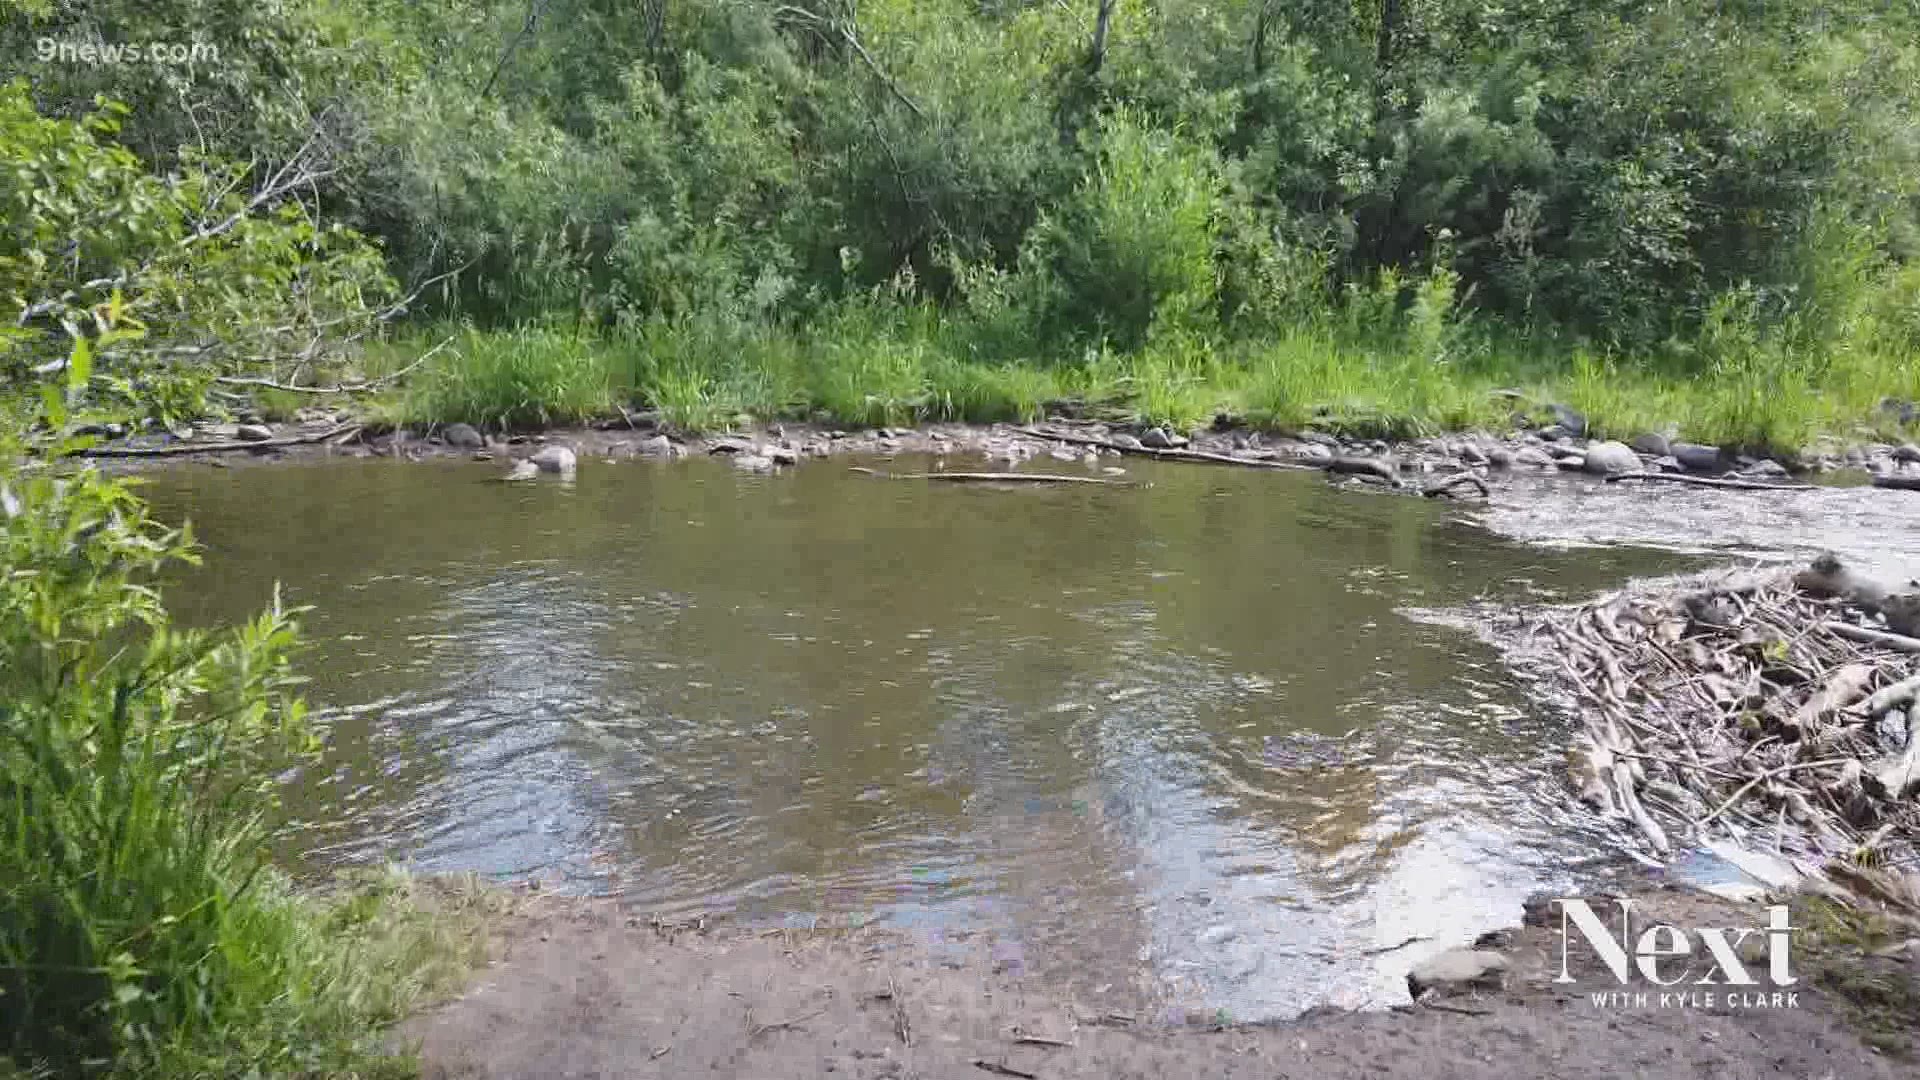 The fish in Southern Colorado, particularly in the Dolores River, are so stressed that wildlife workers are asking people not to go fishing in the afternoon.